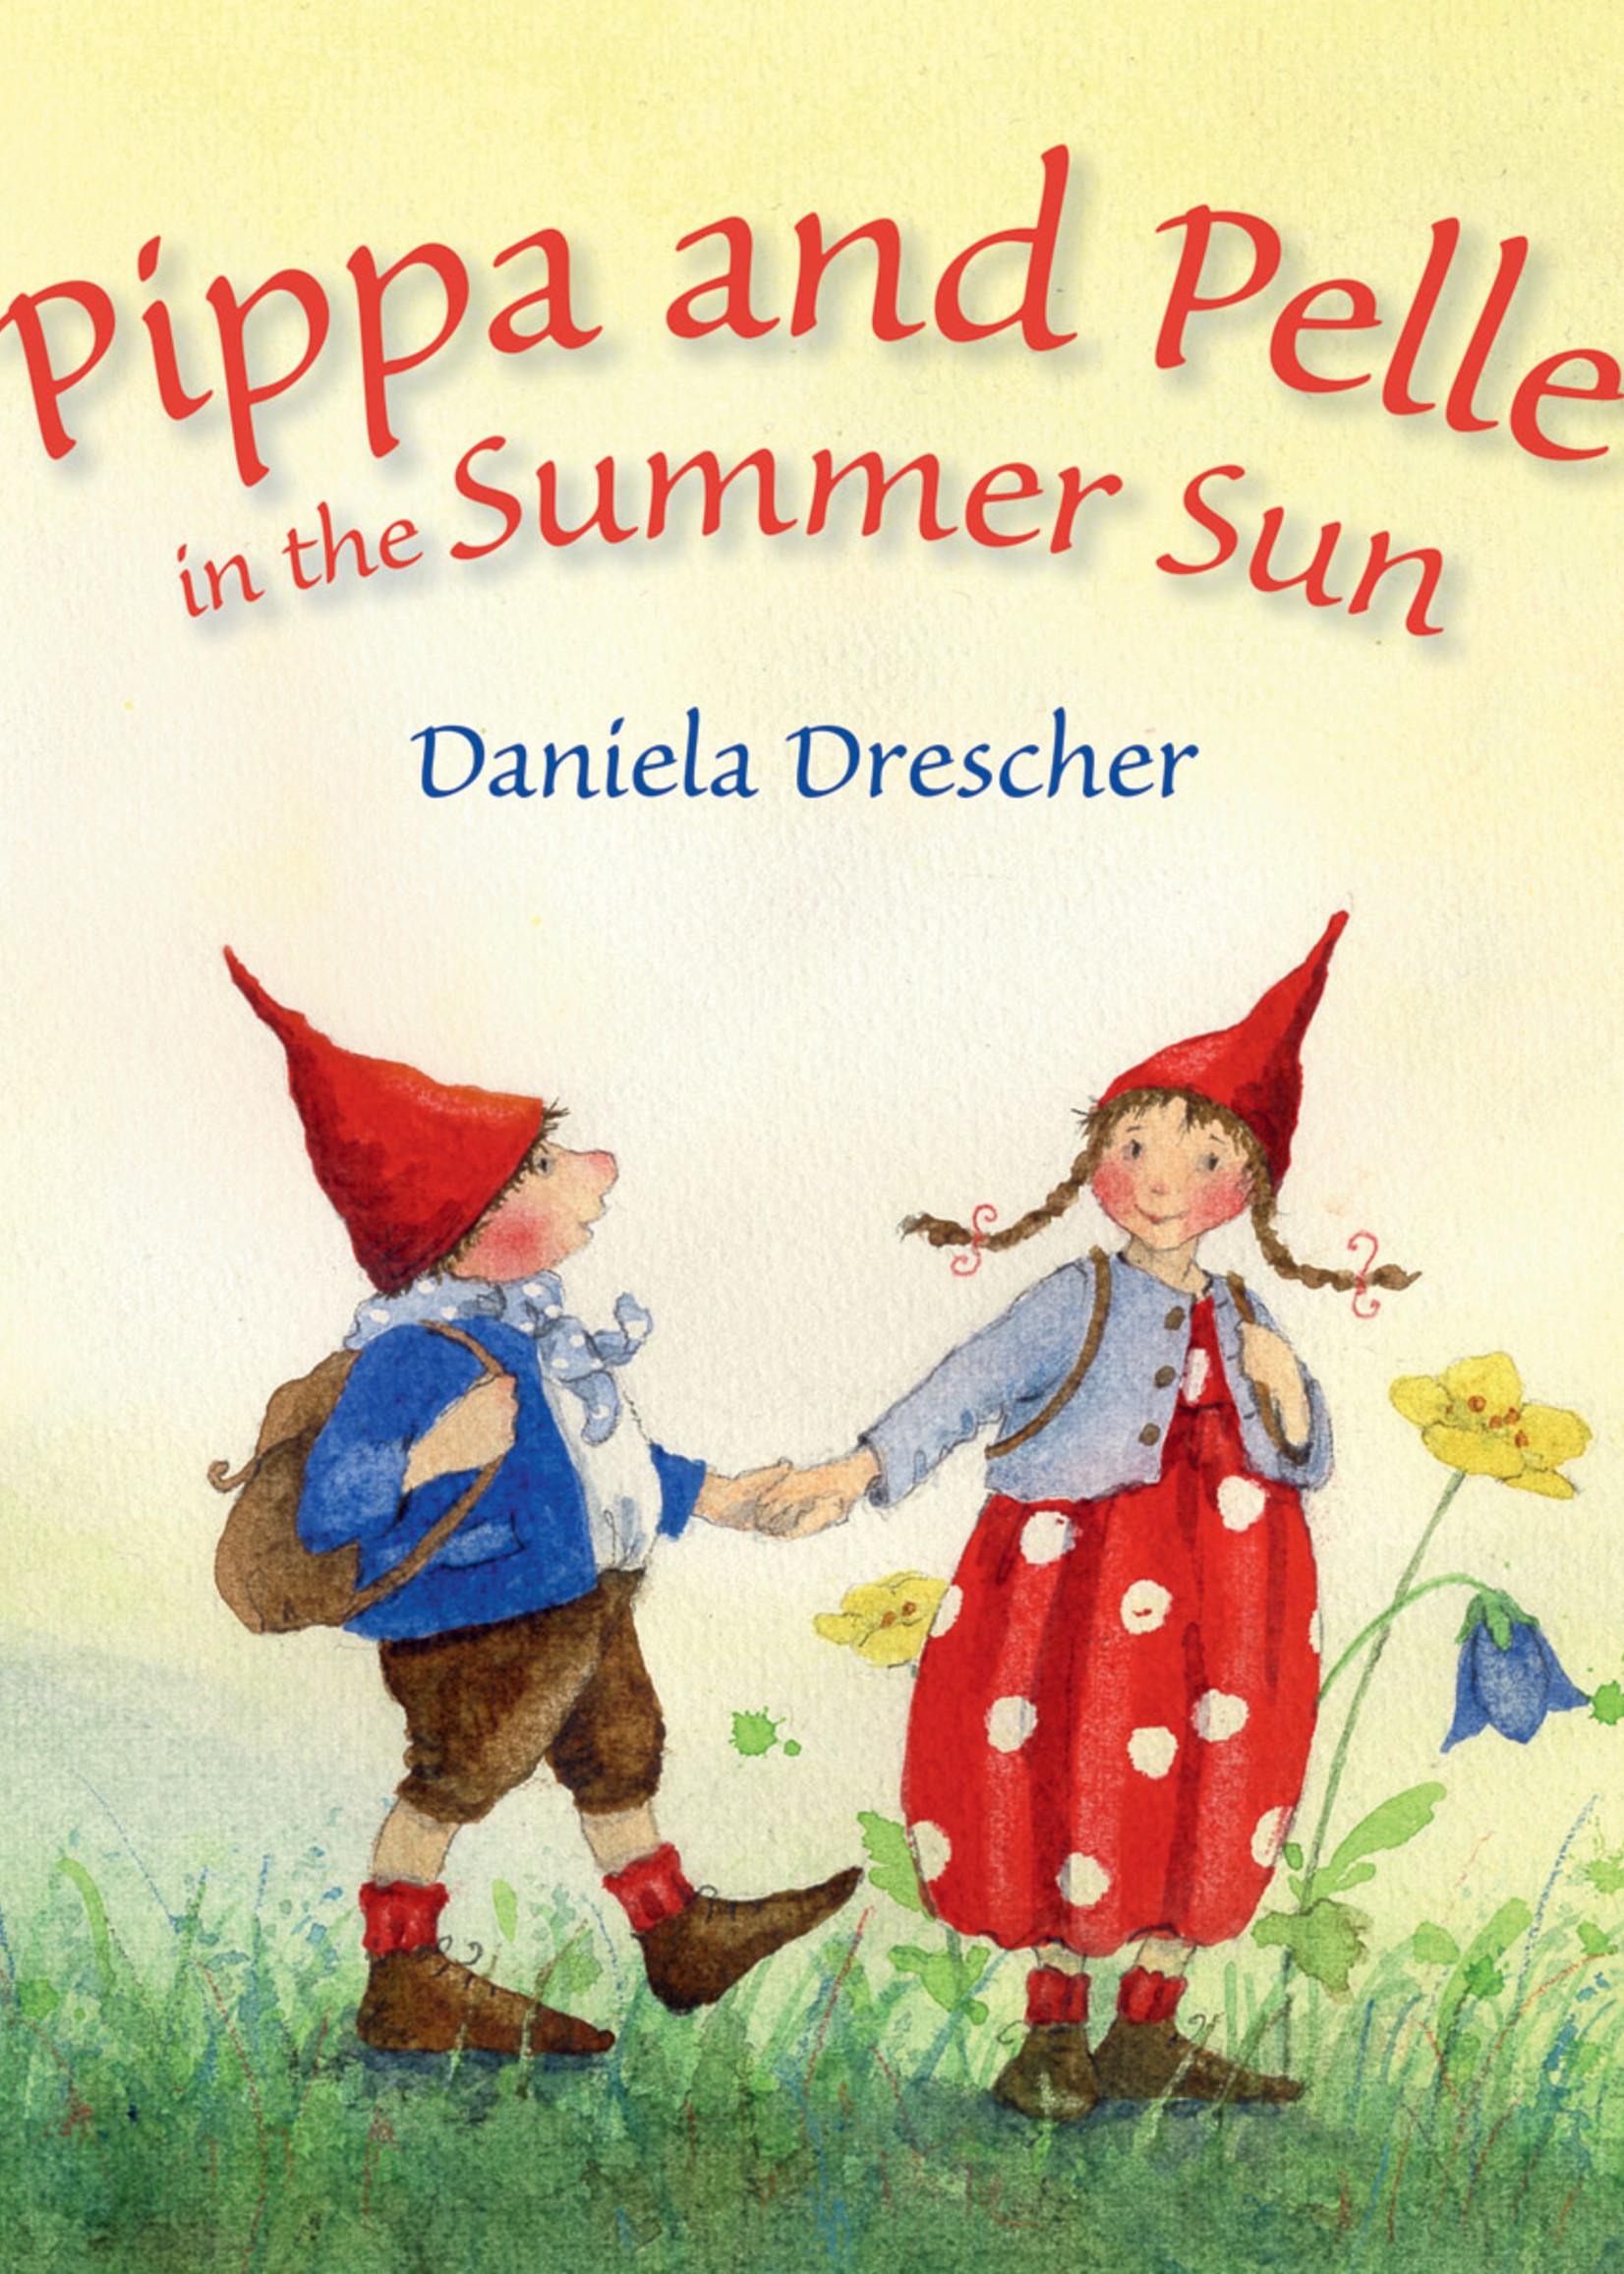 Pippa and Pelle in the Summer Sun - Board Book